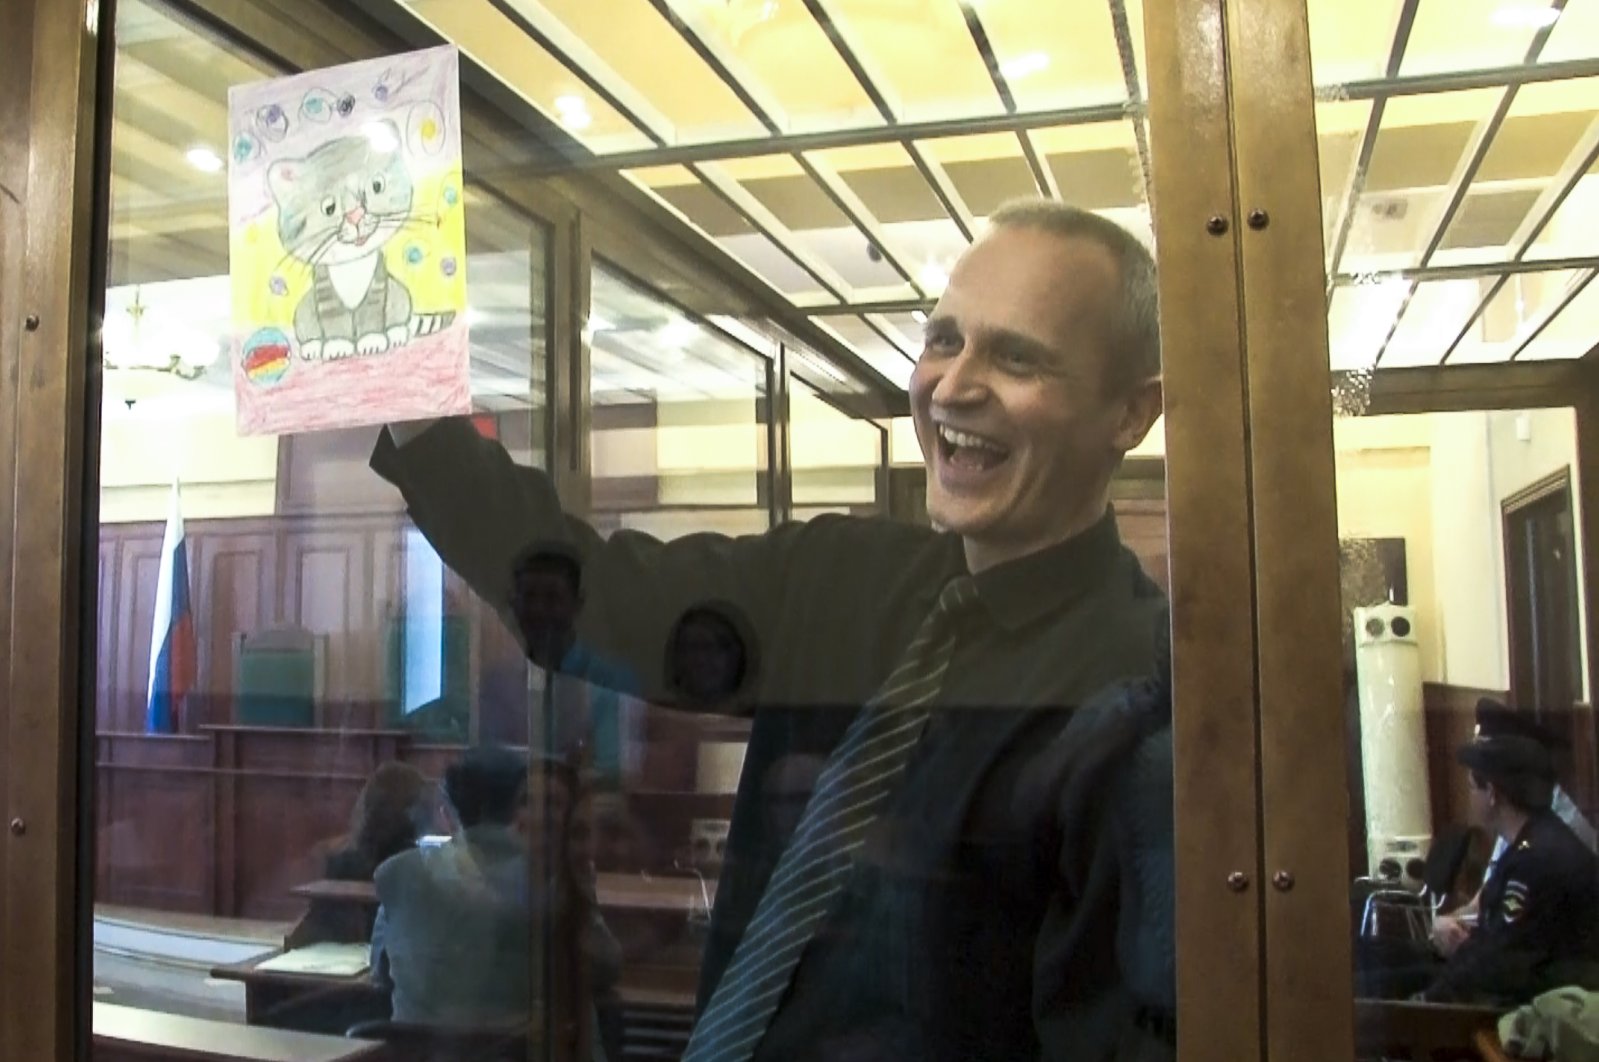 In this file image taken from video, Dennis Christensen shows a picture in a courtroom in Oryol, Russia, May 23, 2019. (AP Photo)